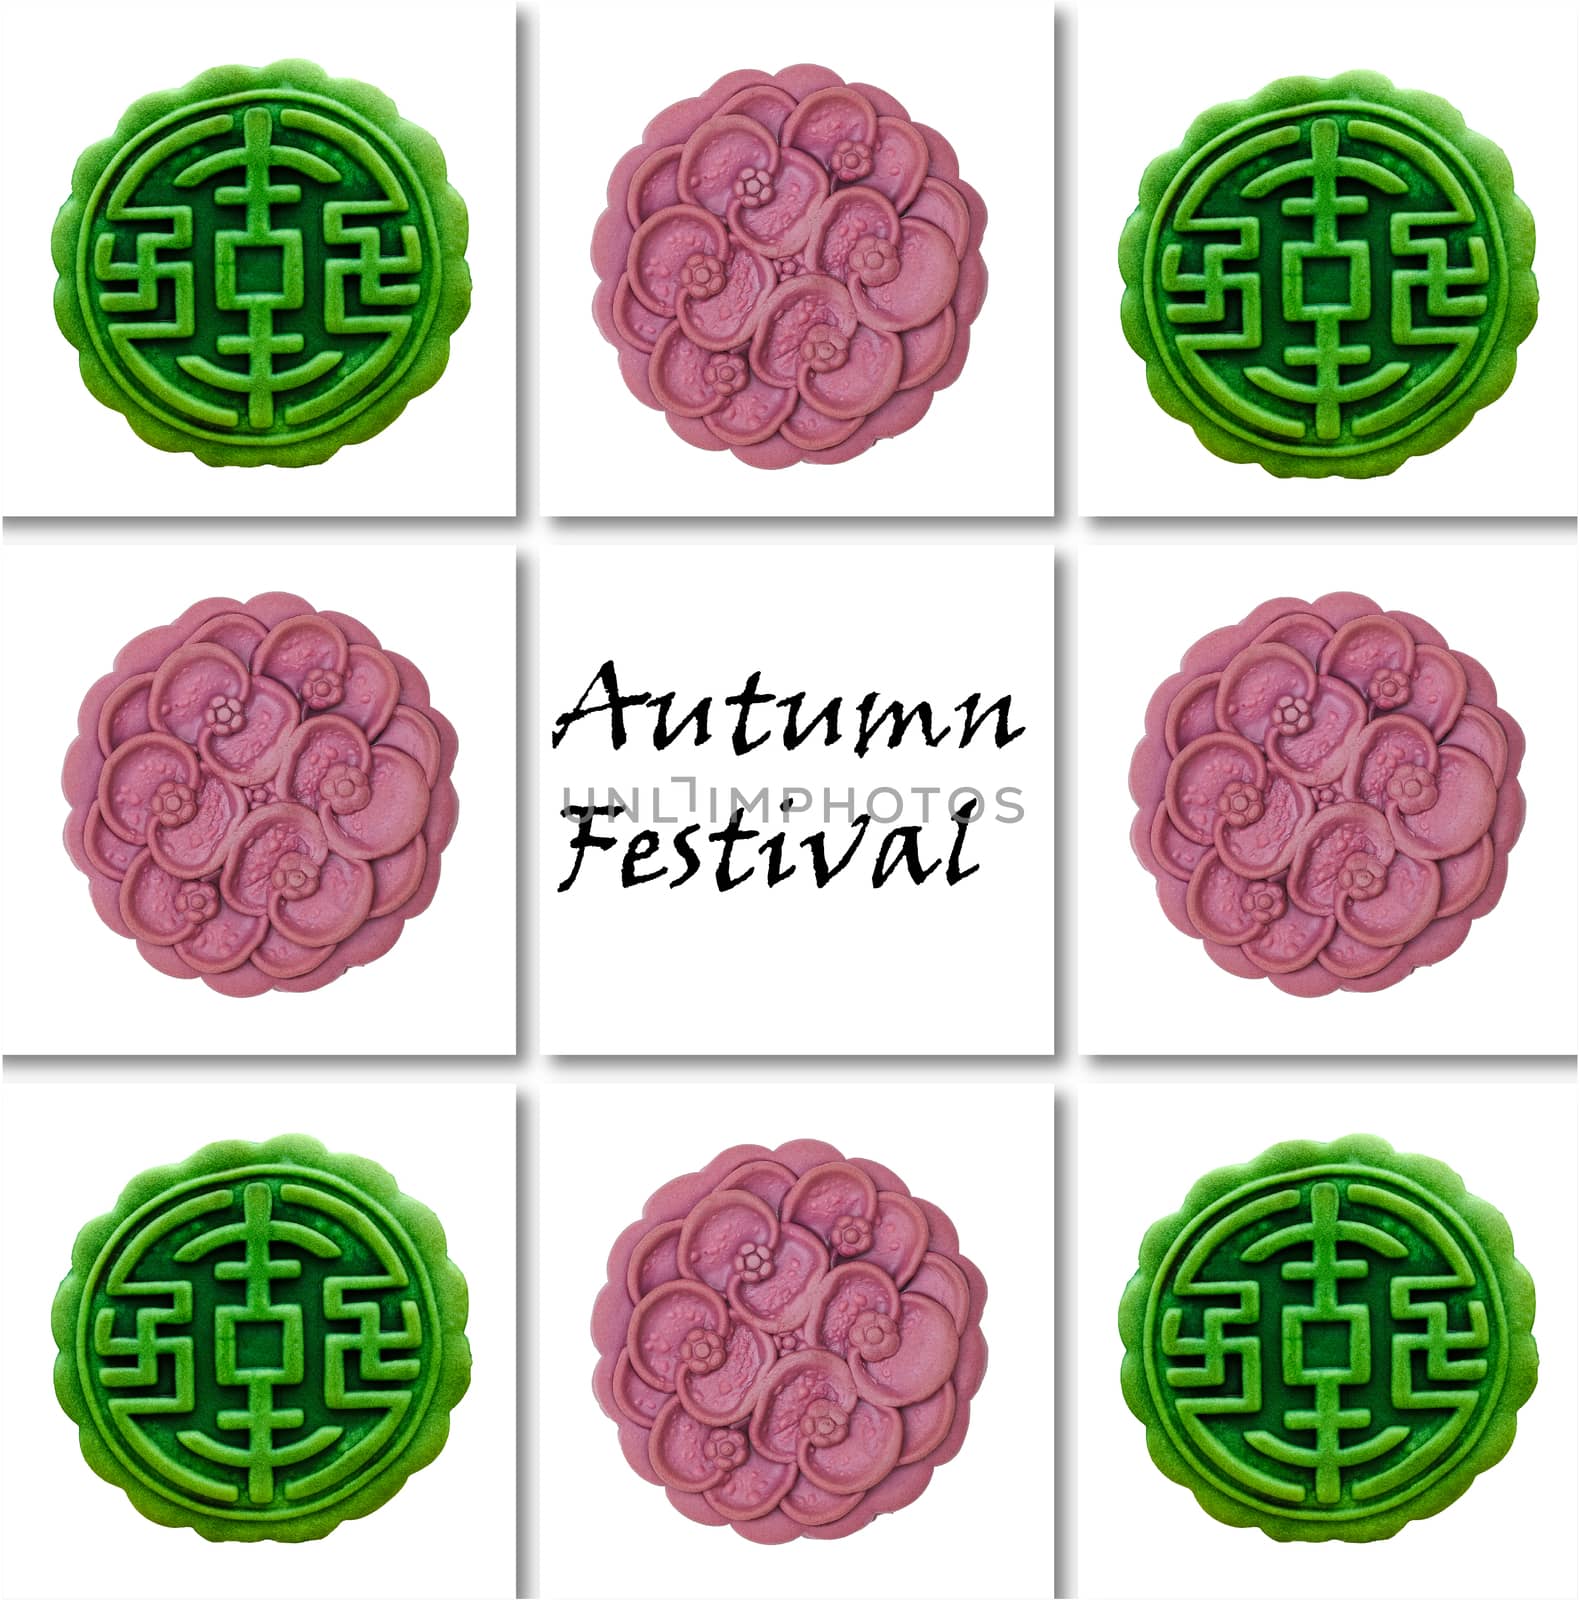 Green tea and japanese yam moon cakes with texts on white tiles background. Autumn Festival. October fest. Chinese celebration. Illustration art.